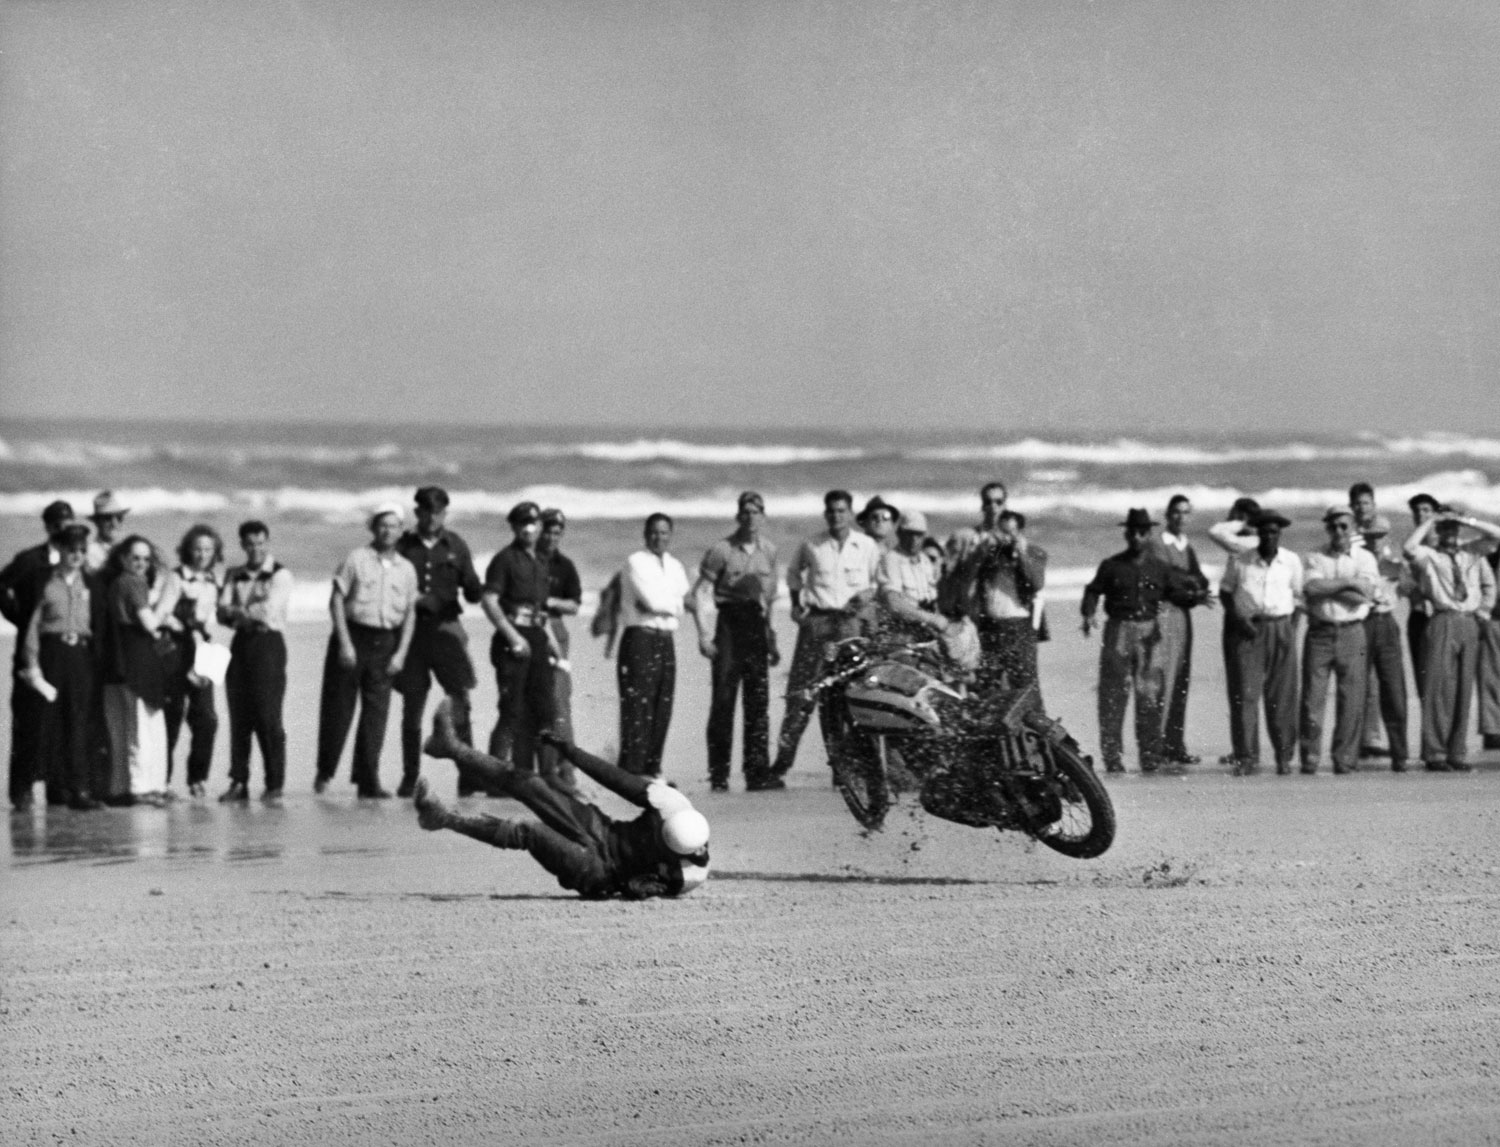 A racer and his bike violently part company in Daytona 200, 1948